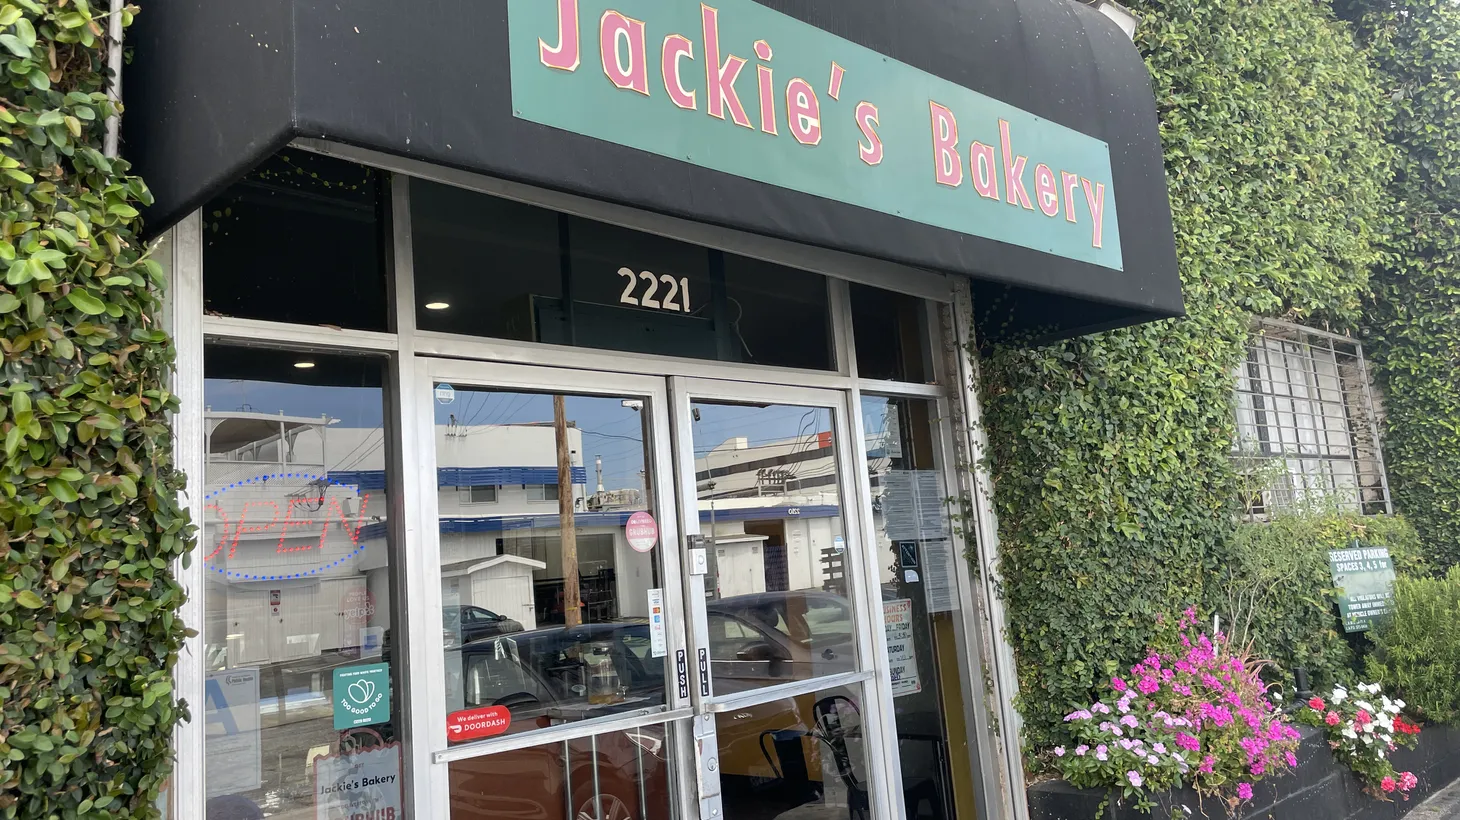 Jackie’s Bakery sells dozens of discount pastries at the end of each day using an app that helps prevent food waste.